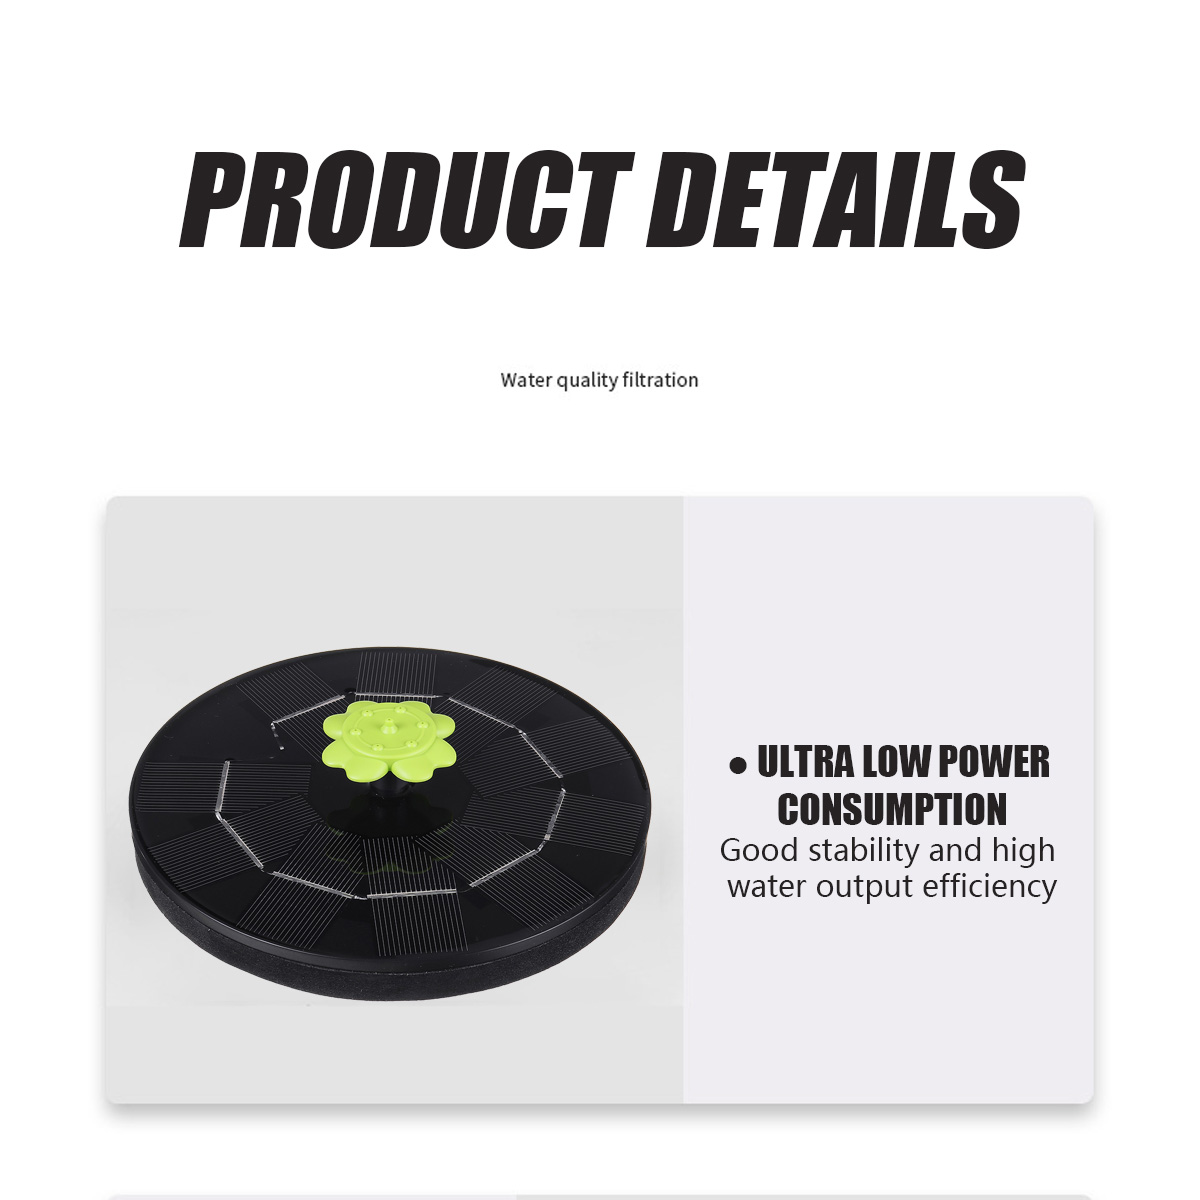 5V-3W-Solar-Powered-Water-Fountain-Pumps-Floating-Fountains-Home-Pond-Garden-Decor-1837061-6